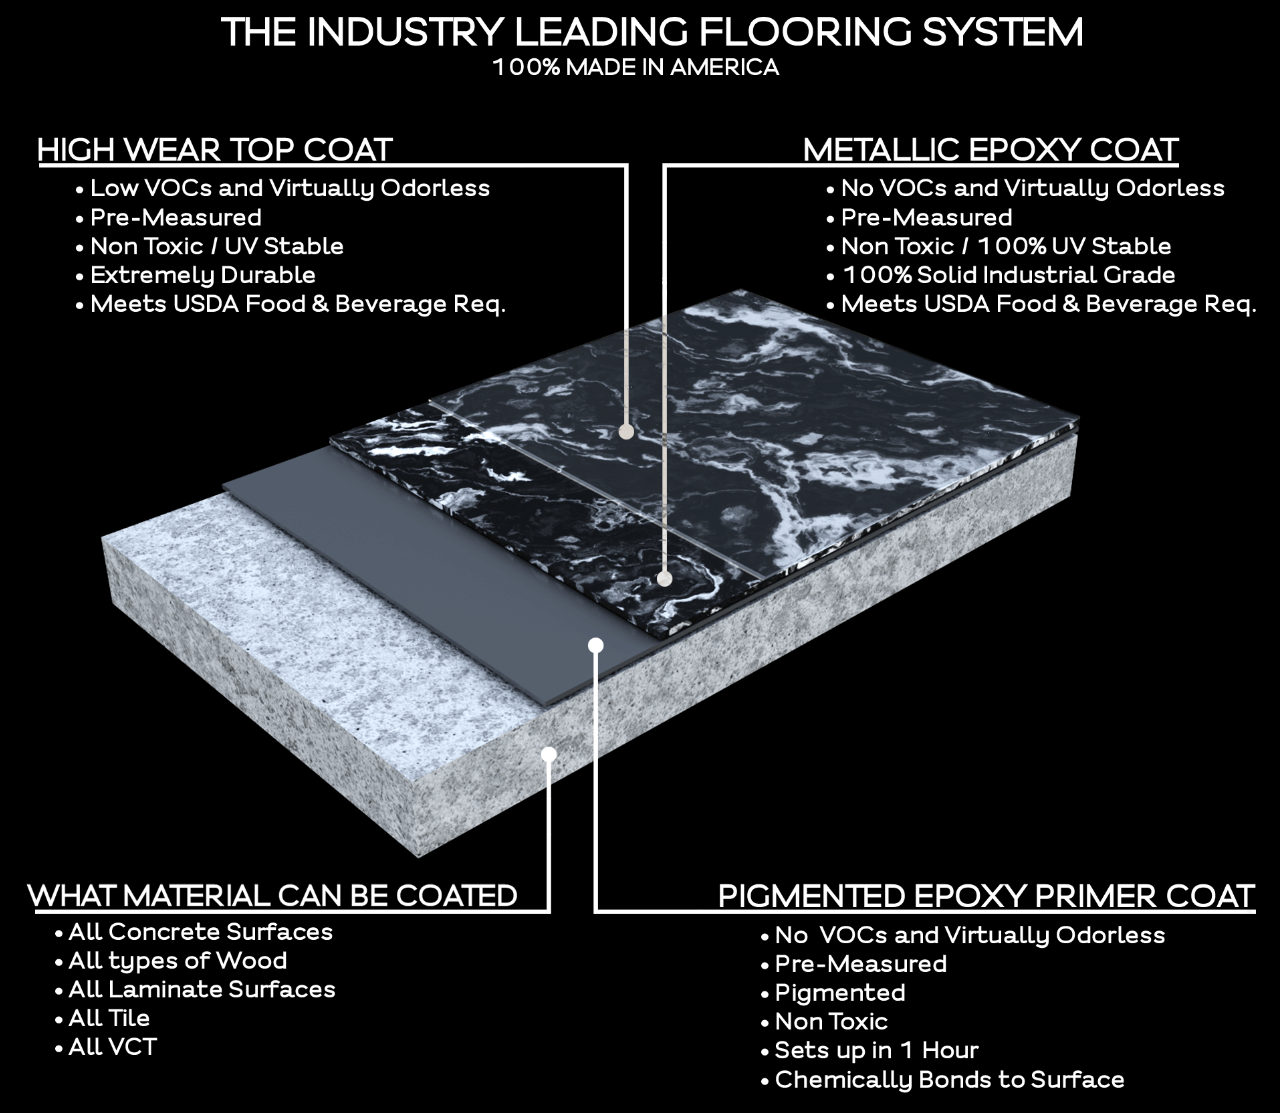 A graphic showing the various layers of a metallic epoxy flooring system.